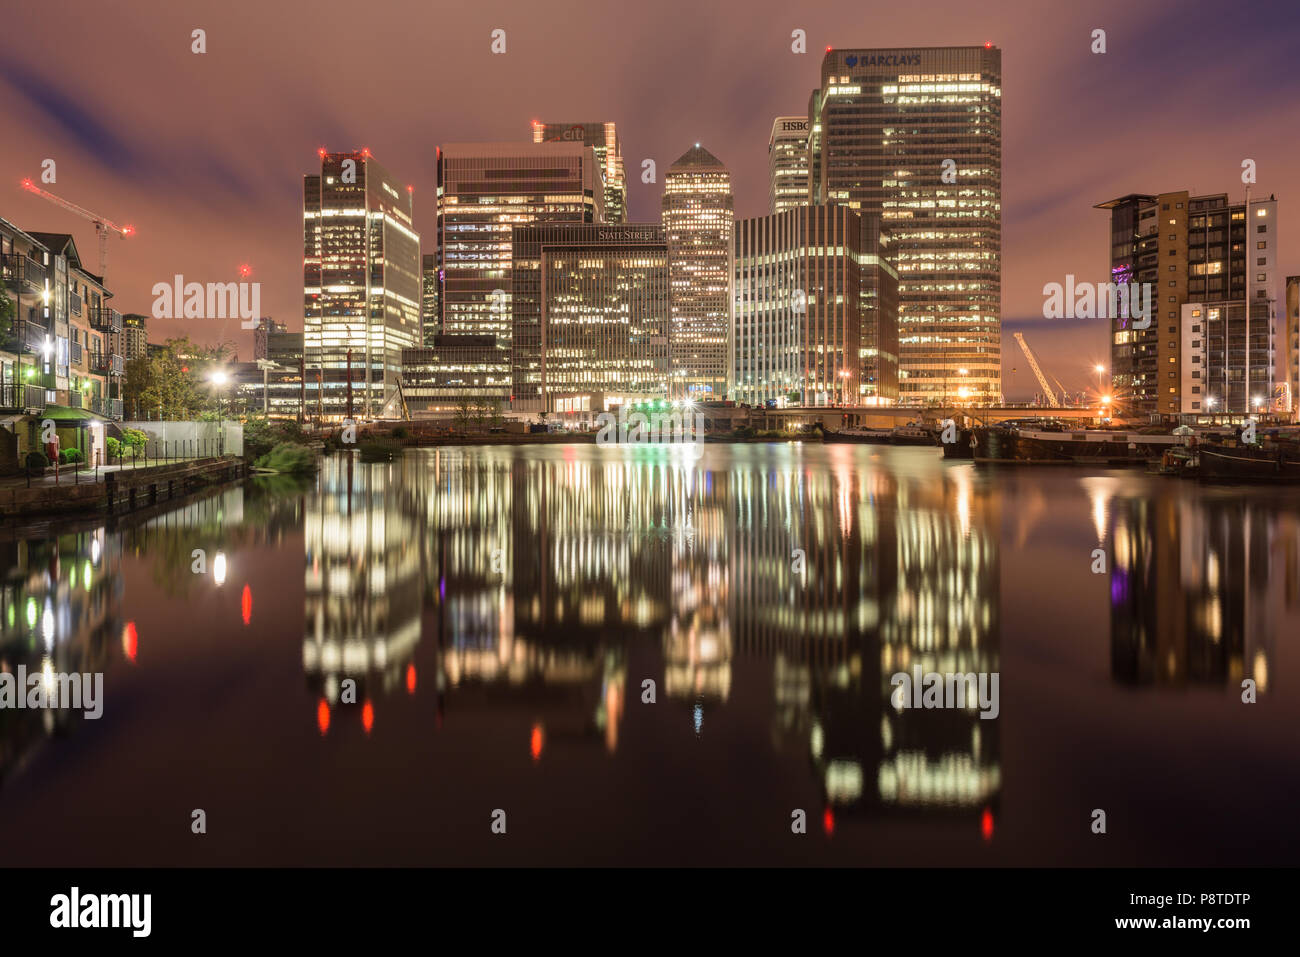 Late night reflections of the illuminated office buildings of Canary Wharf, London, taken by Blackwall Basin Stock Photo